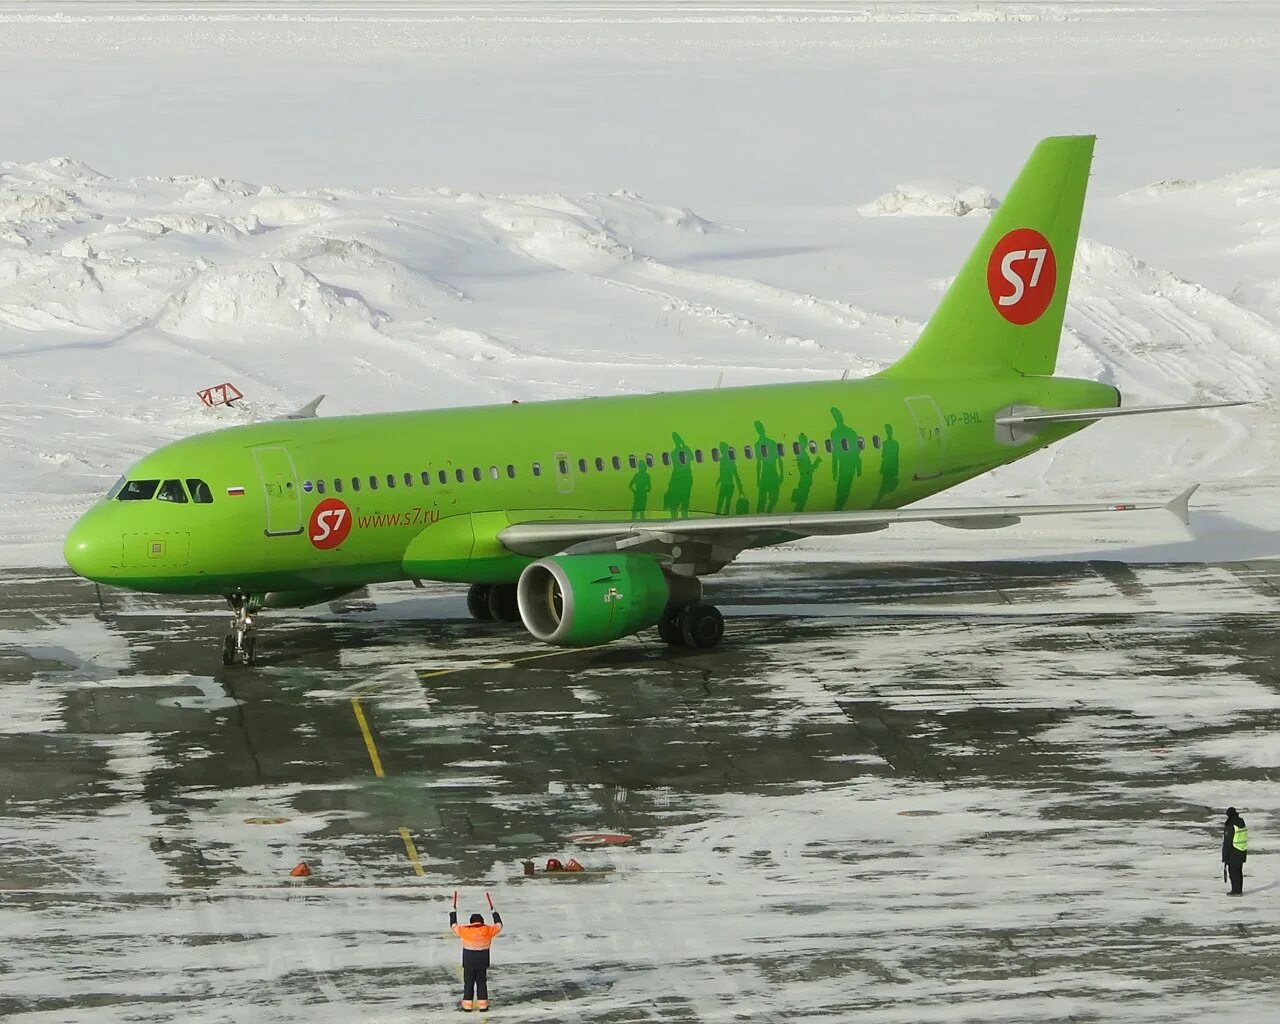 Севен фото. Аэробус а319 s7 Airlines. A319 s7. Airbus a-319 самолёта s7. Airbus a319 s7.